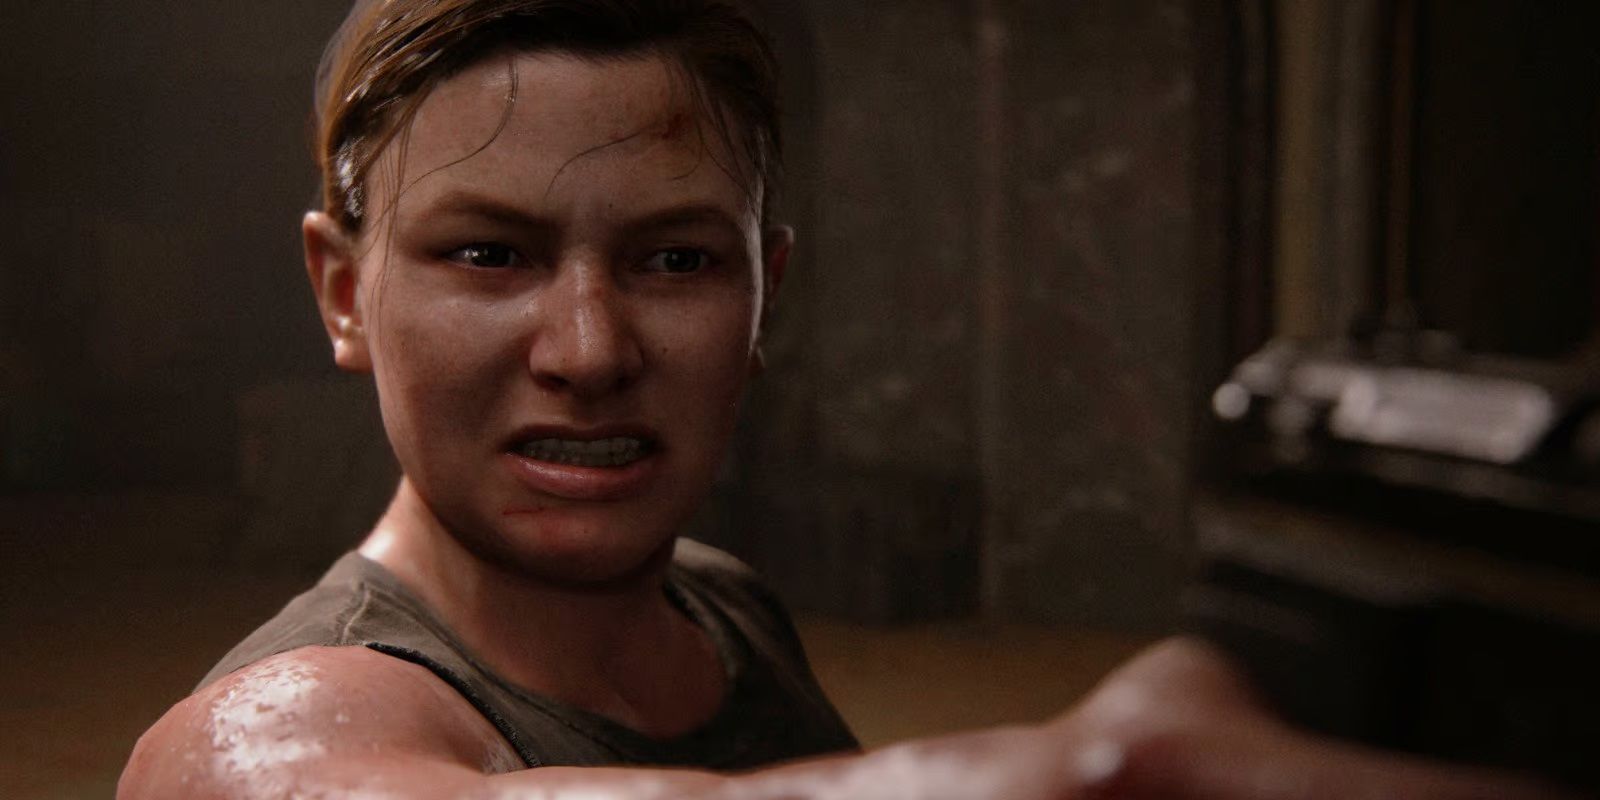 Abby holding a gun in the theater in The Last of Us Part II